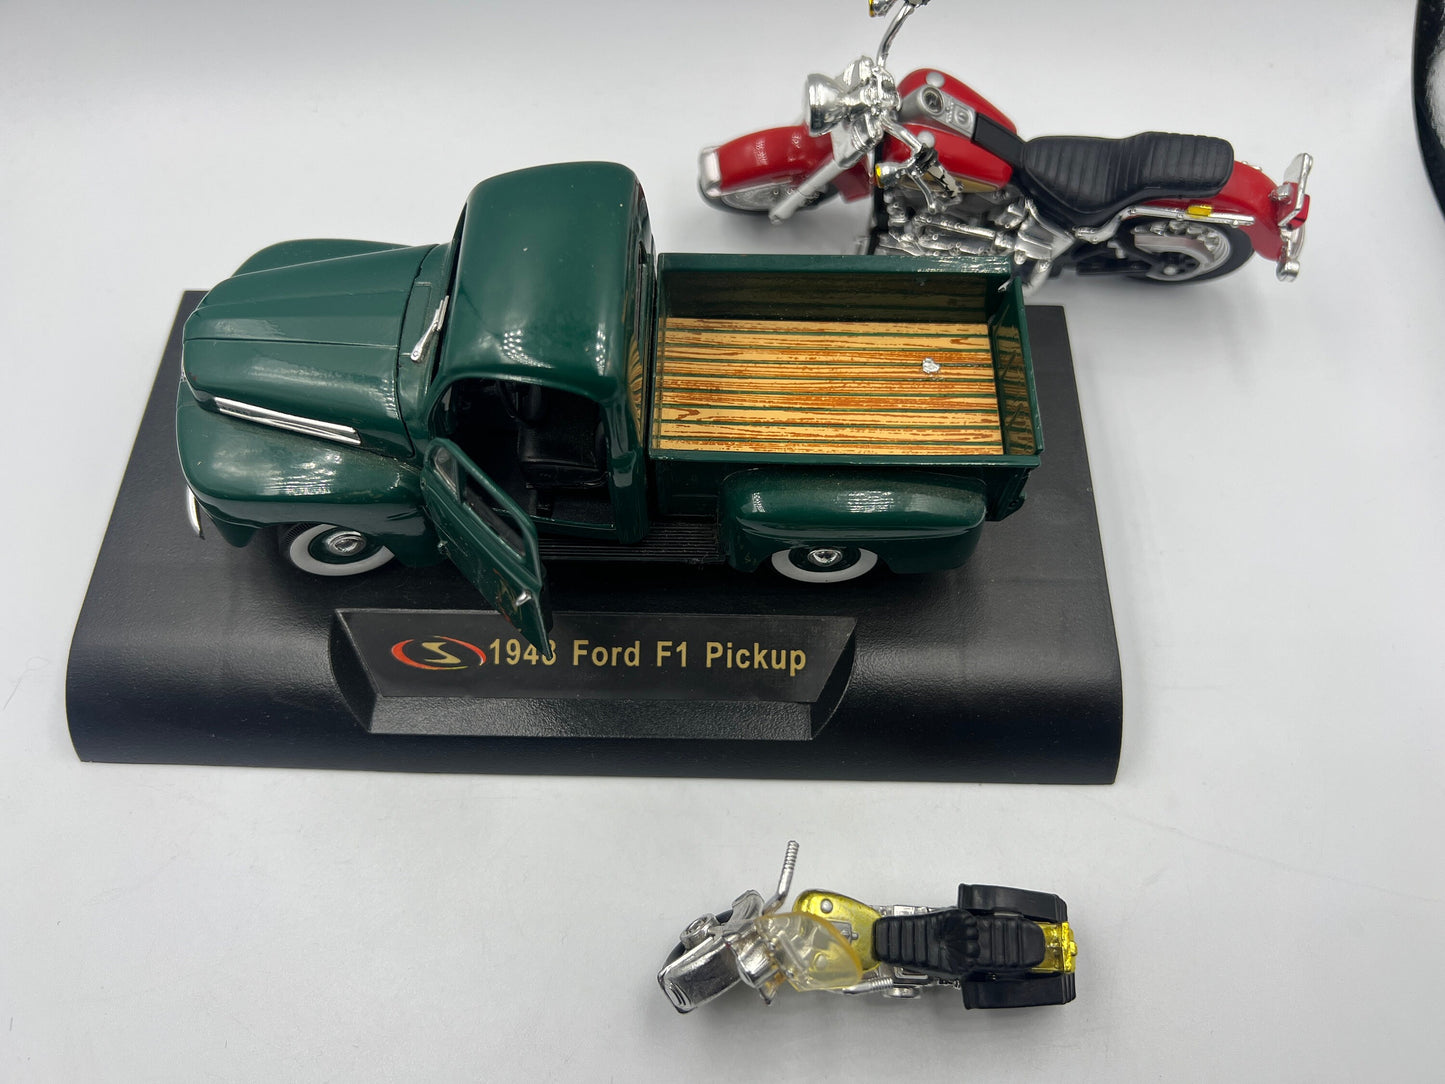 1948 Ford F1 Model Pick Up truck, Harley Davidson Heritage Softtail  1:18 diecast, and Reduced model Harley Davidson Sportster 1 by34